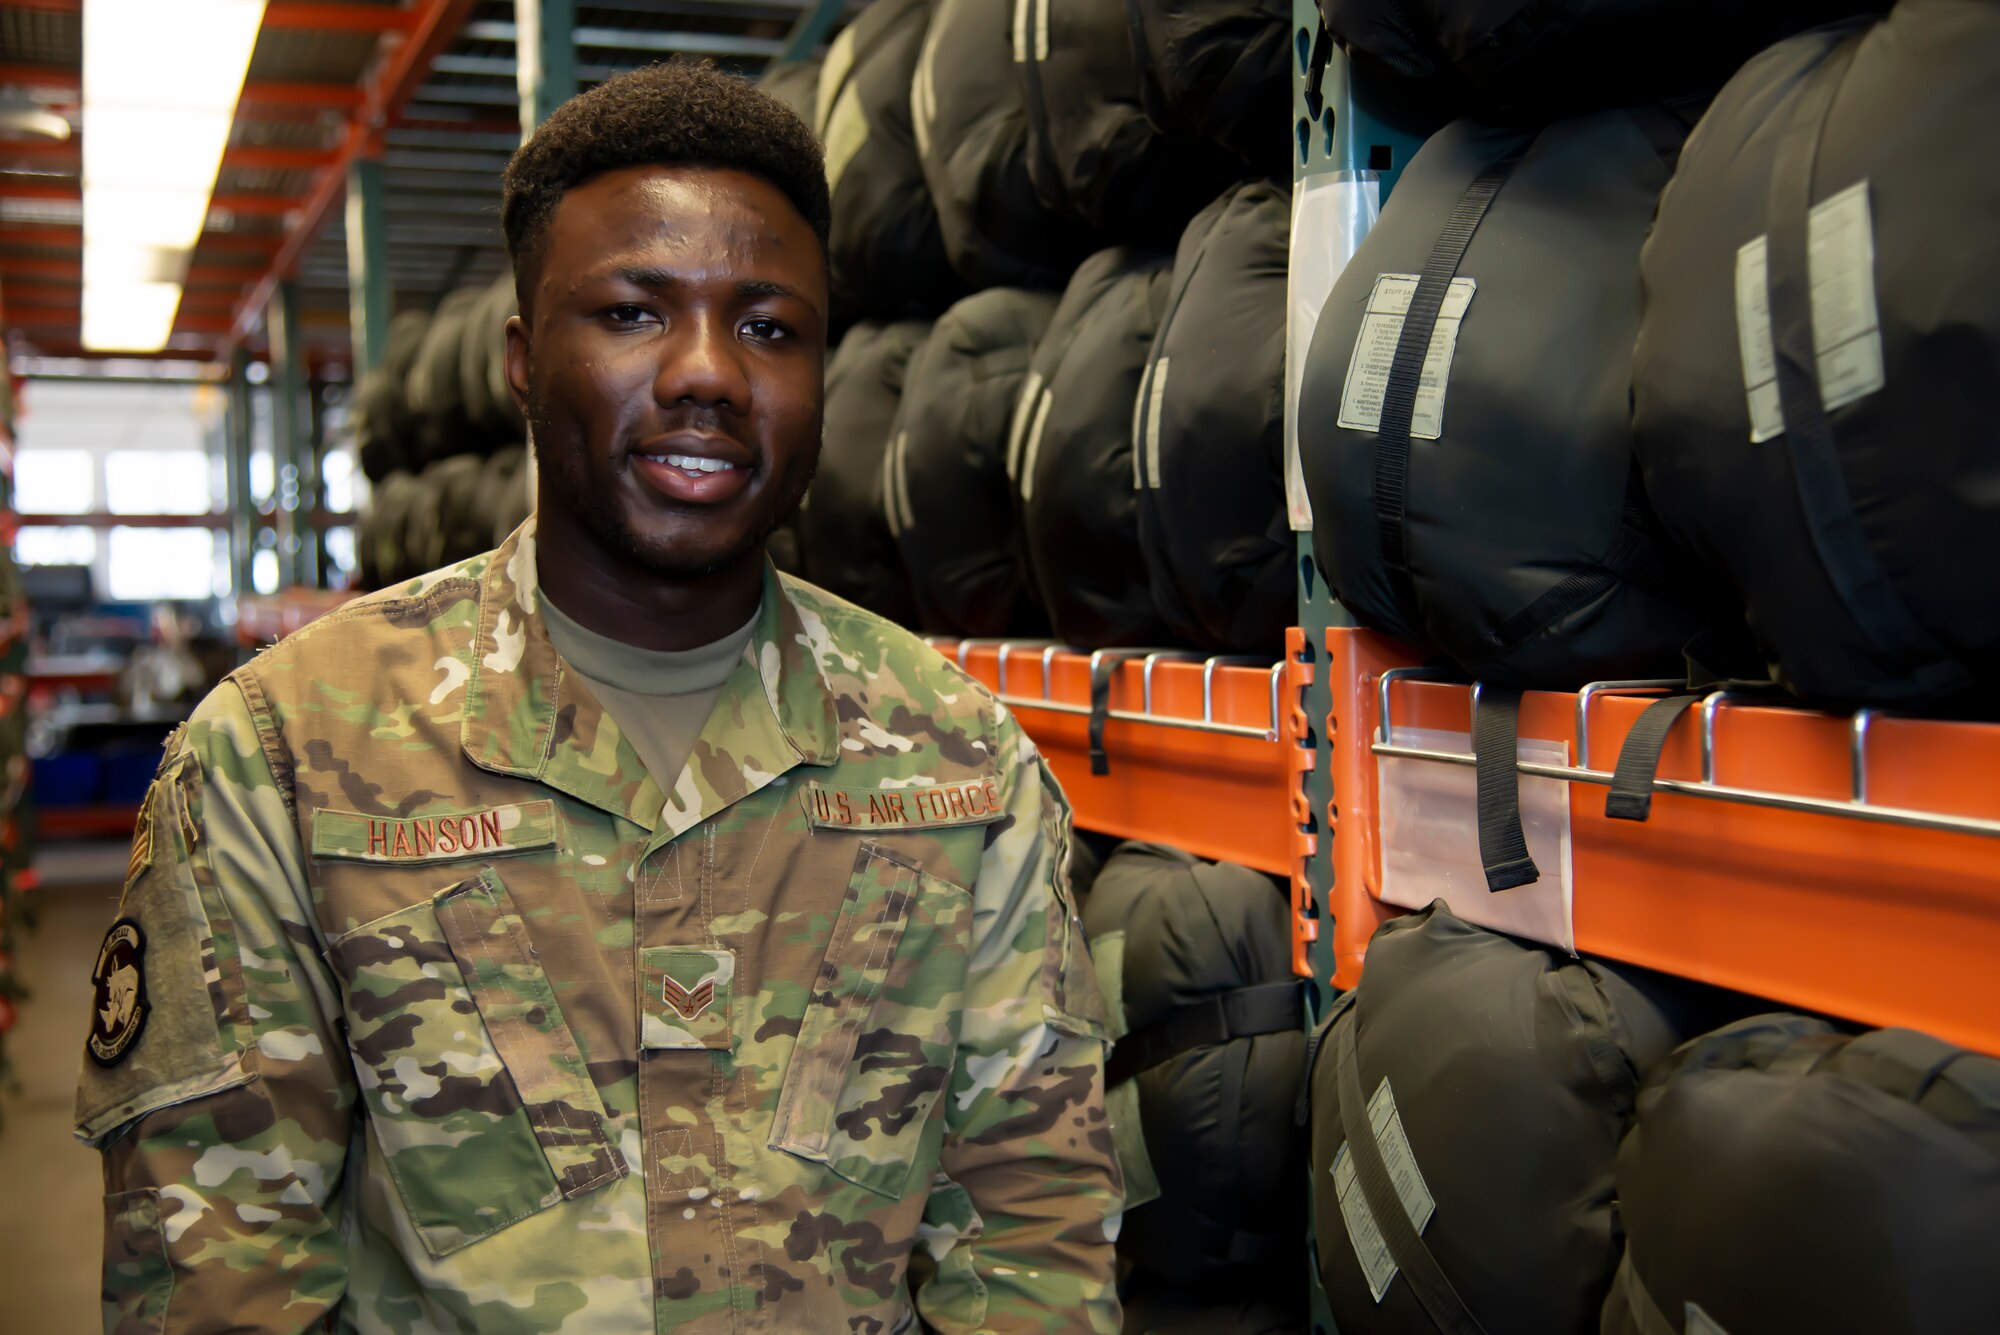 Senior Airman Kobby Hanson, 302nd Logistics Readiness Squadron, stands inside a supply warehouse at Peterson Air Force Base, Colorado, Aug. 23, 2019.